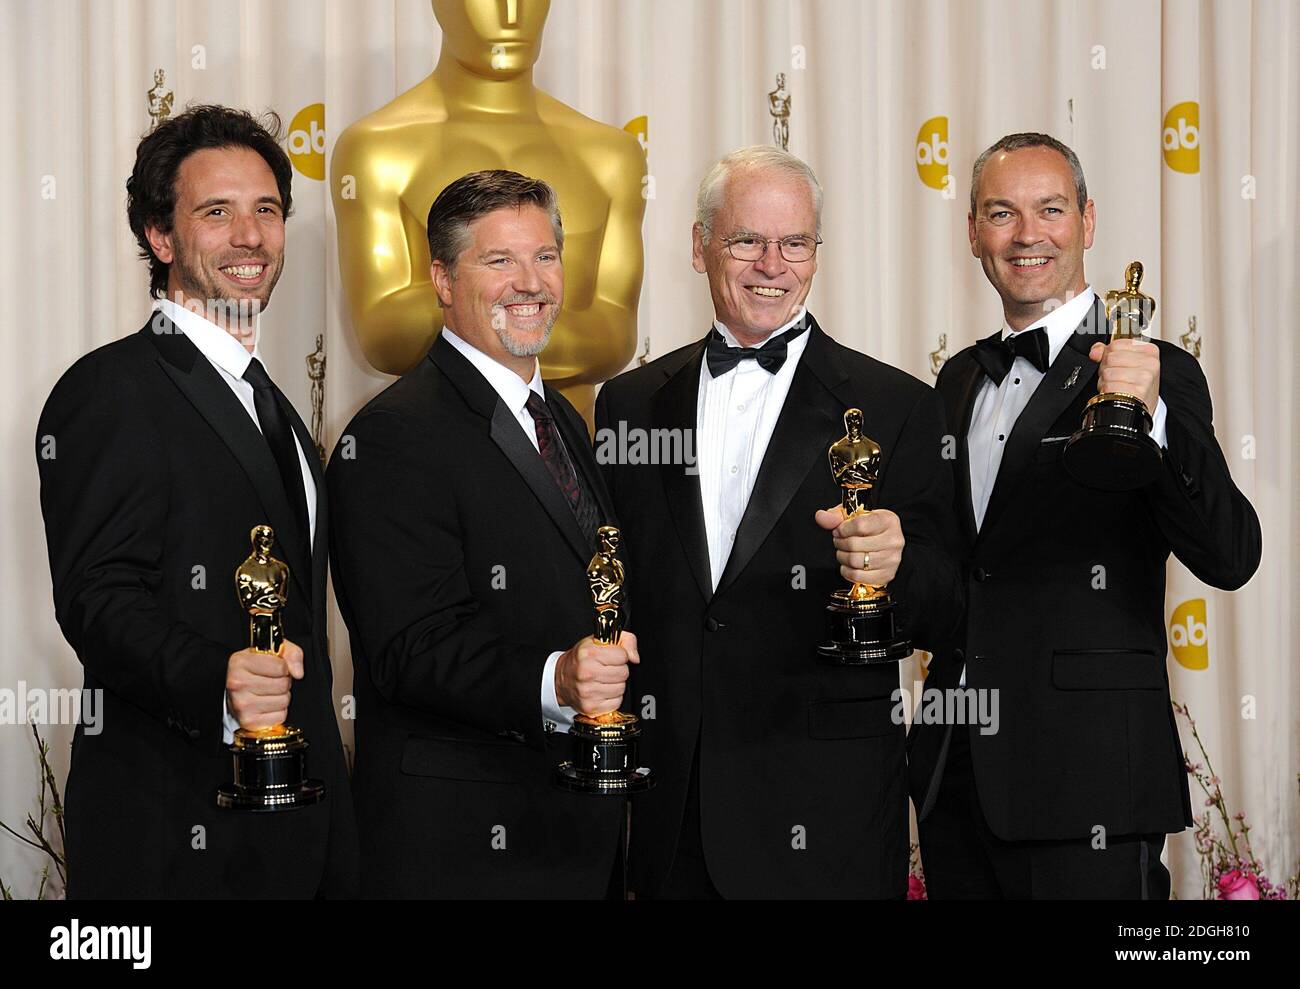 Guillaume Rocheron, Bill Westenhofer, Donald R Elliot and Erik-Jan De Boer with the Oscar for Achievement in Visual Effects received for Life of Pi at the 85th Academy Awards at the Dolby Theatre, Los Angeles. Stock Photo